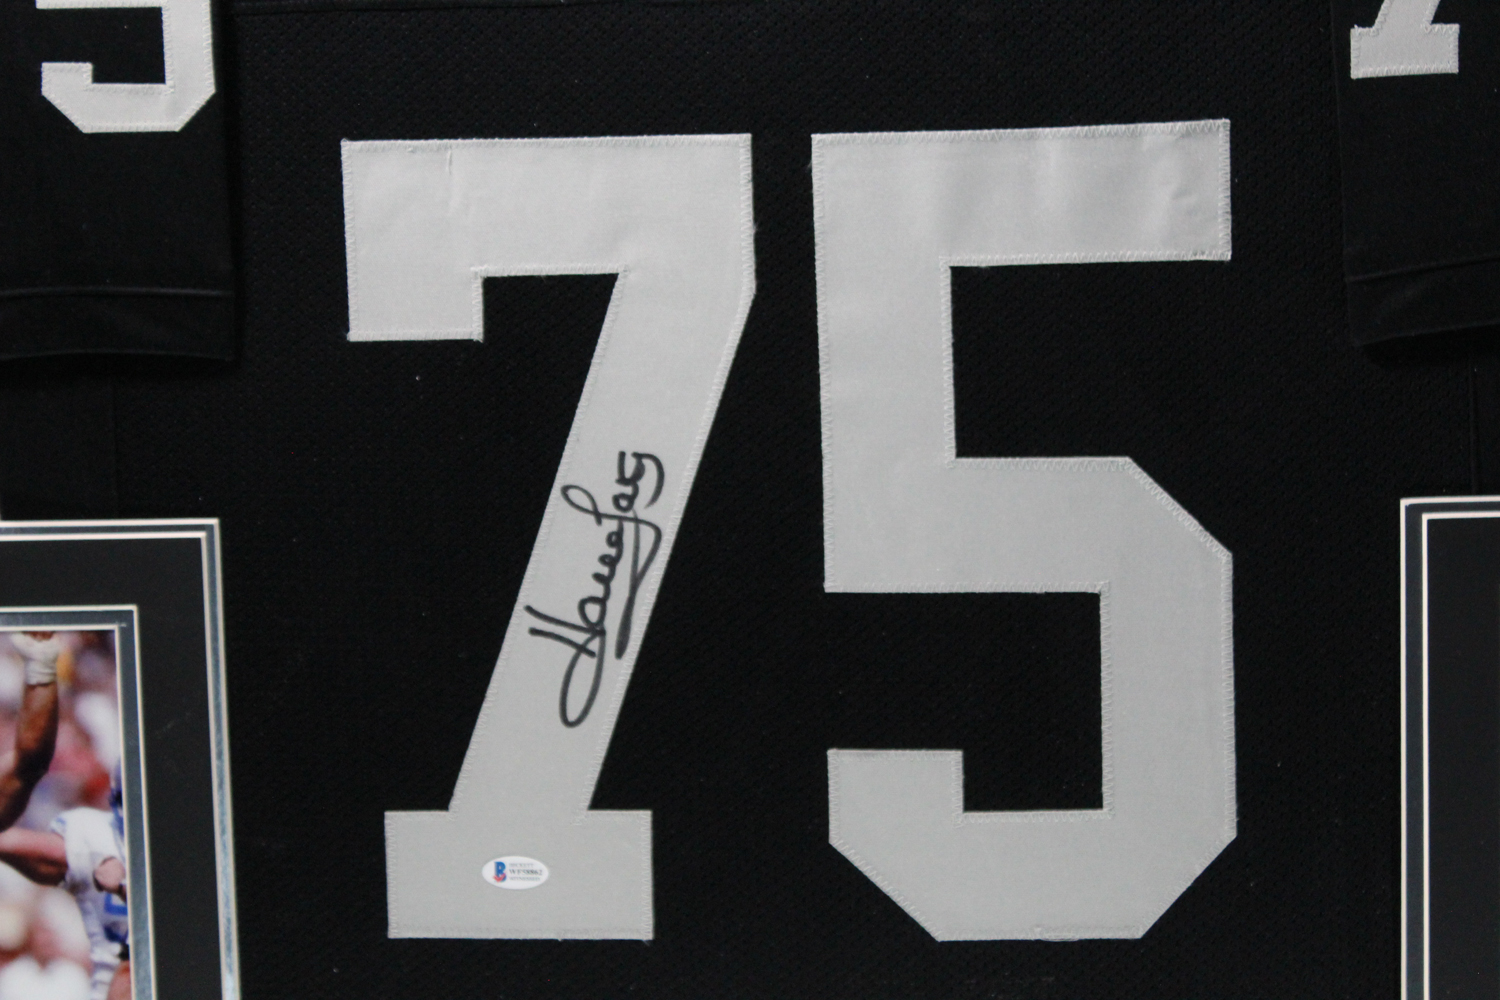 Howie Long Autographed/Signed Pro Style Framed Black XL Jersey Beckett